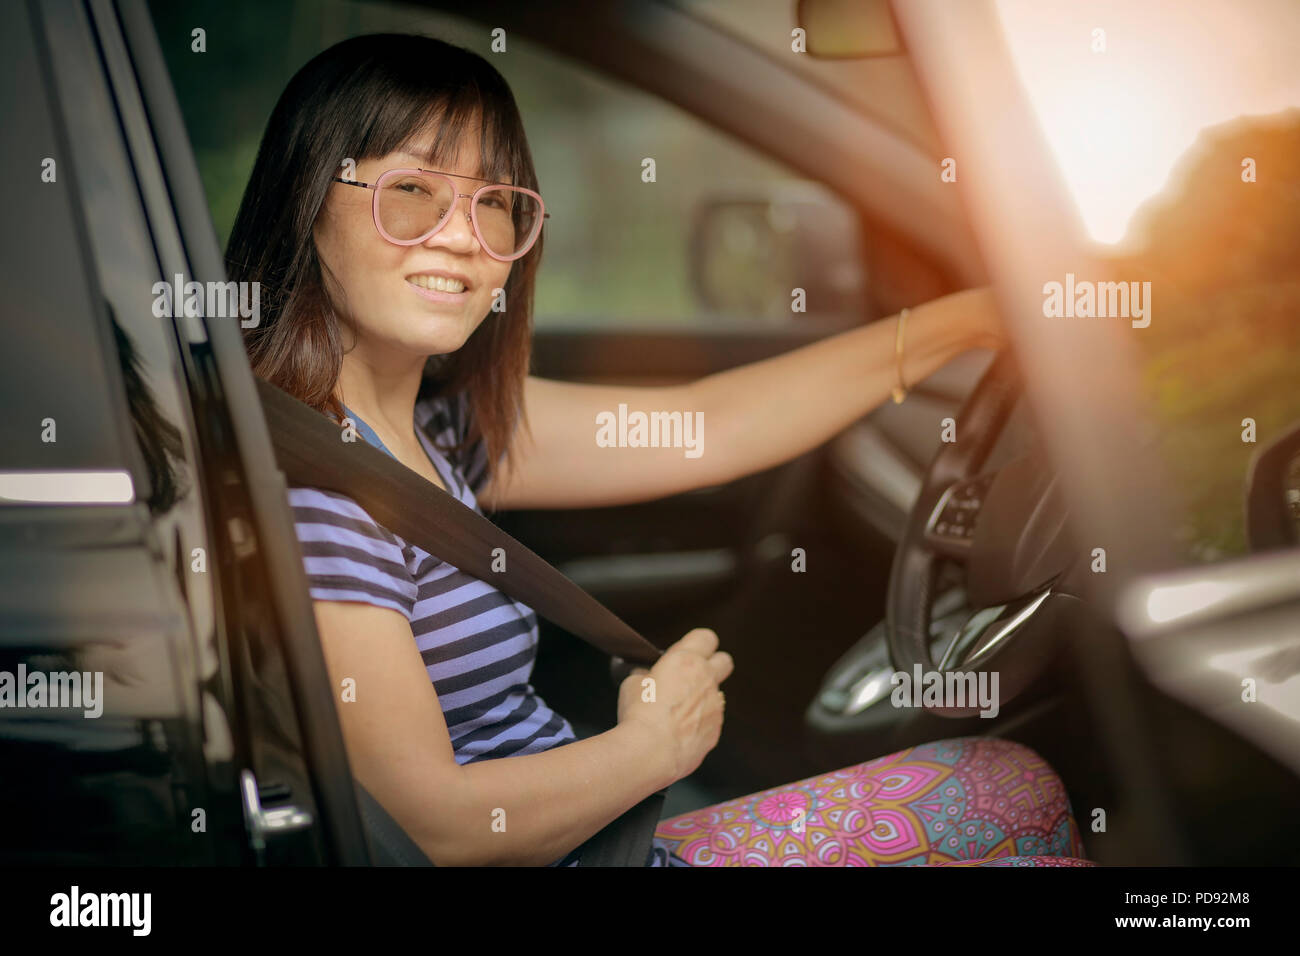 asian woman driving personal car toothy smiling face Stock Photo